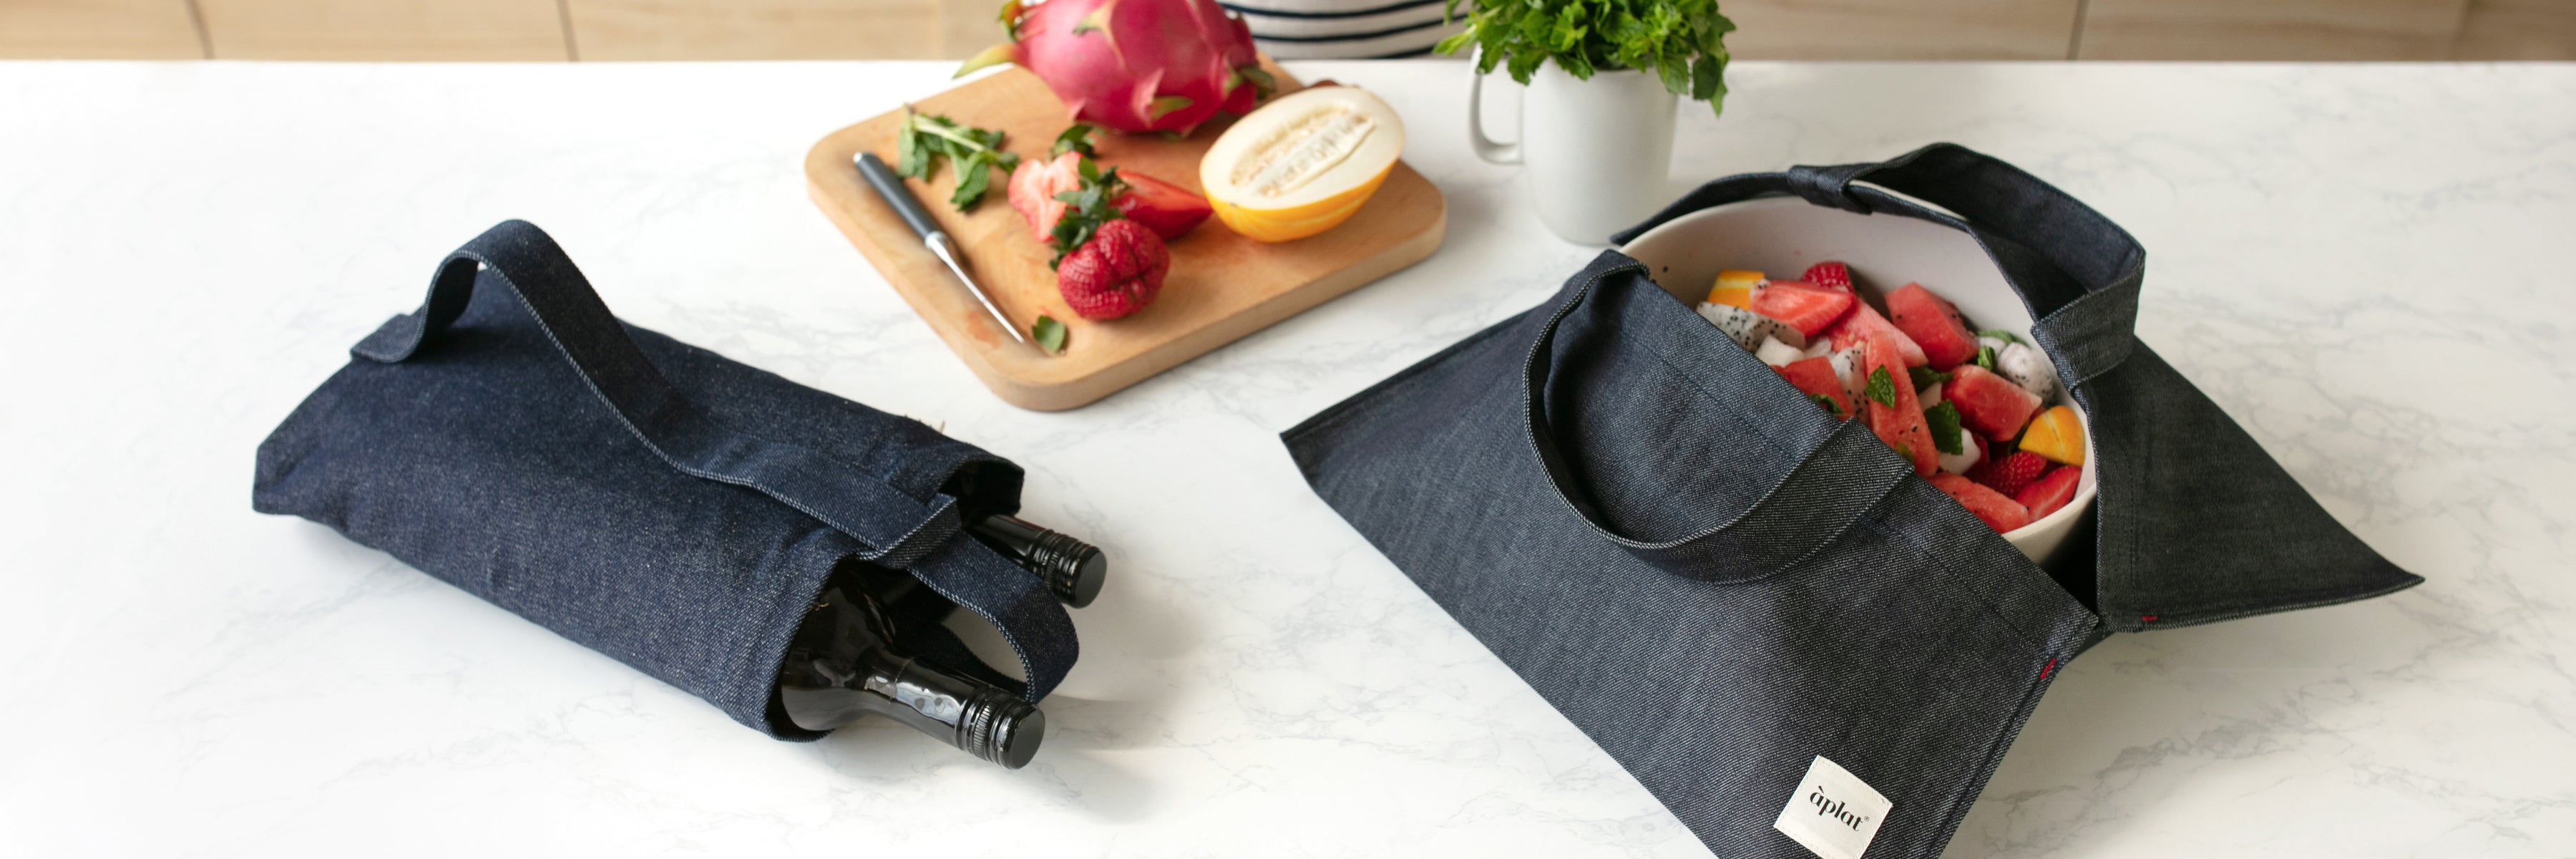 Bestselling Reusable Cotton Canvas Carrier Totes, Covers, and Bags for food and drinks